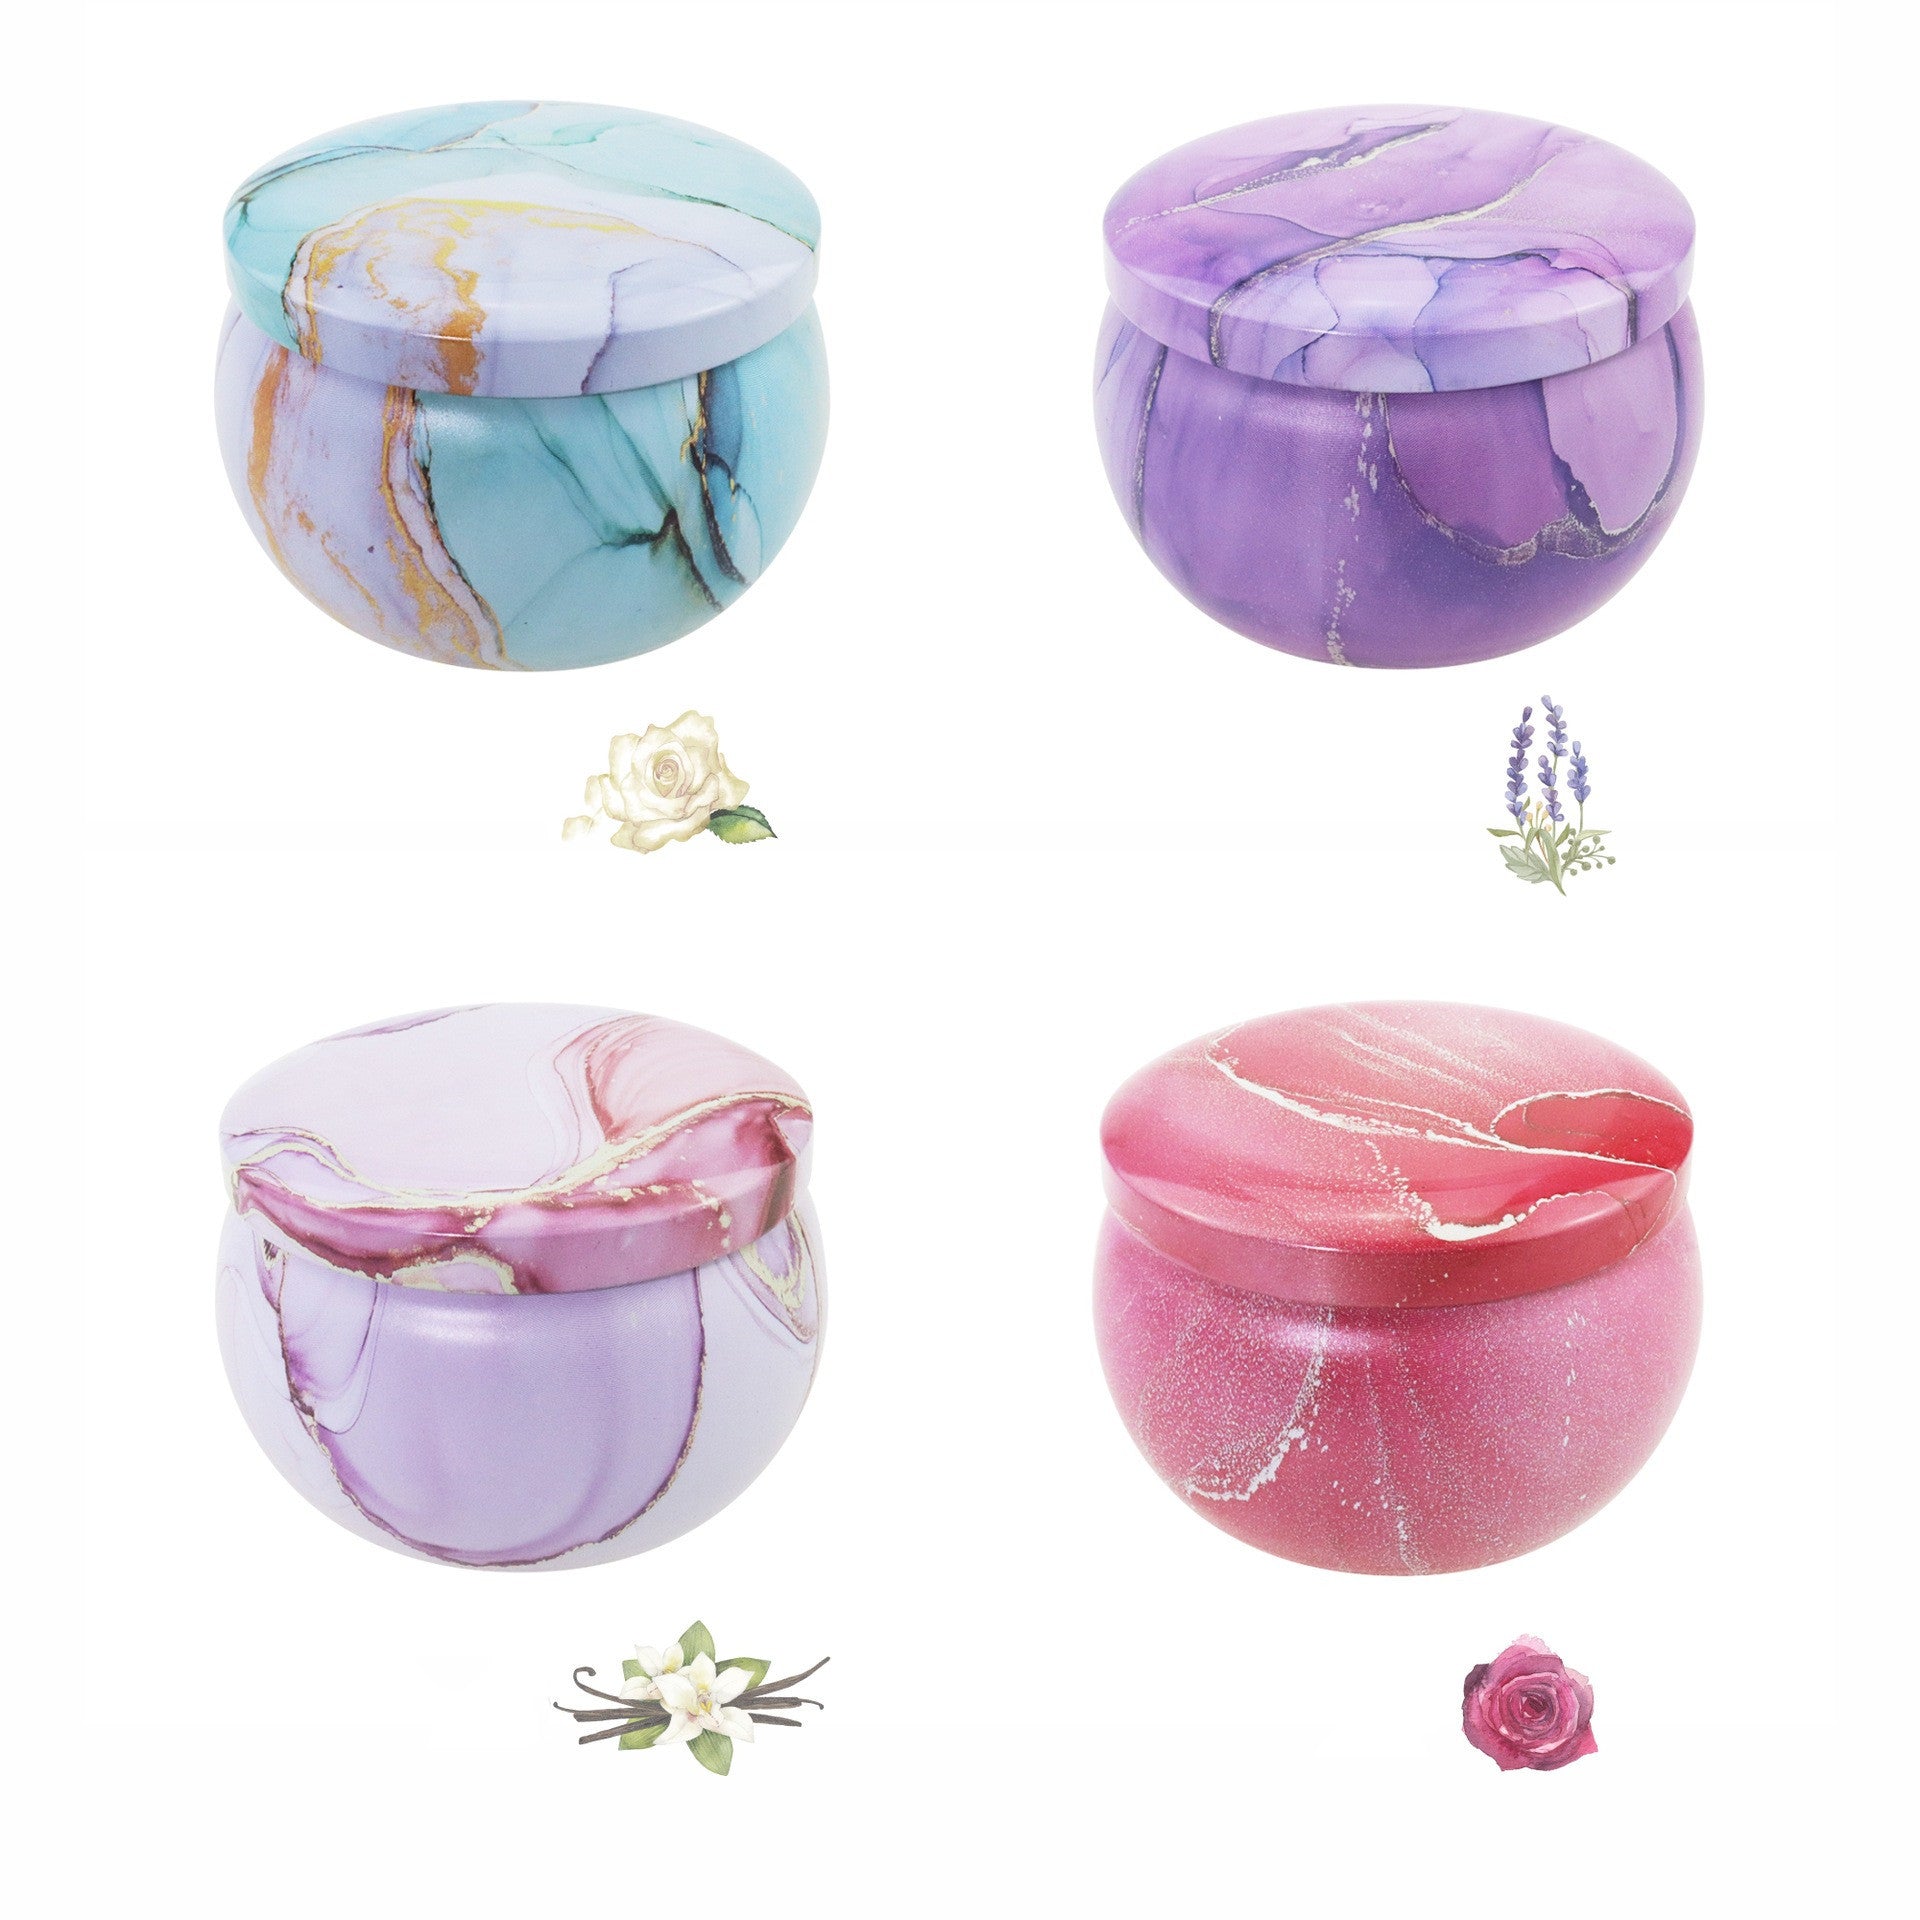 Importikaah-candles-fragrant-souvenirs-for-birthdays